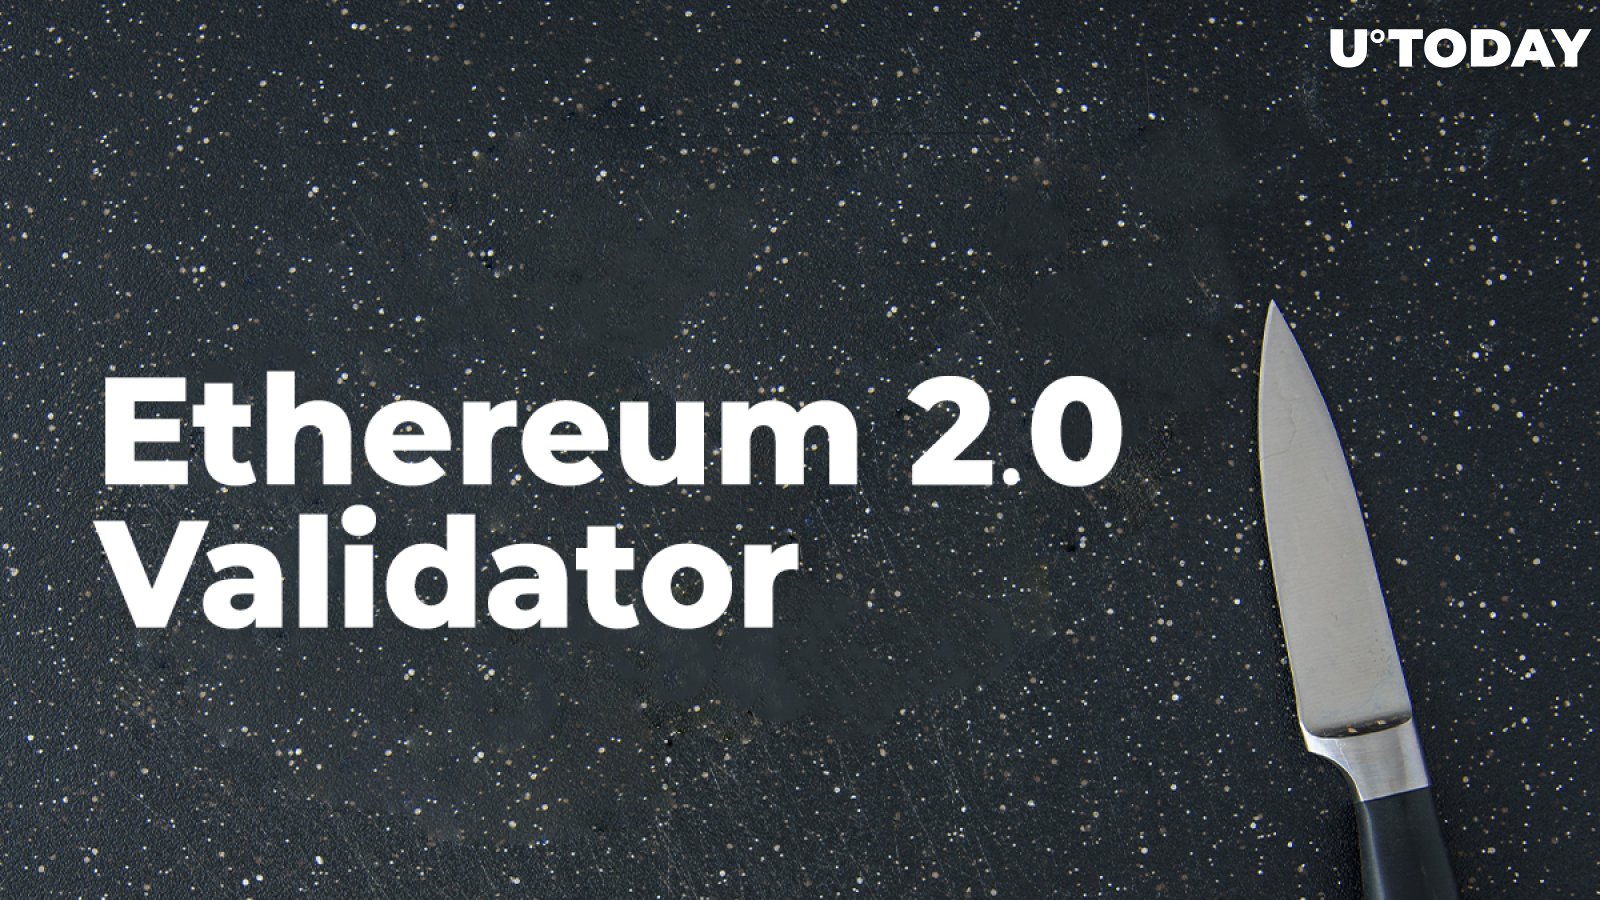 Here's Why First Ethereum 2.0 Validator Just Got Slashed